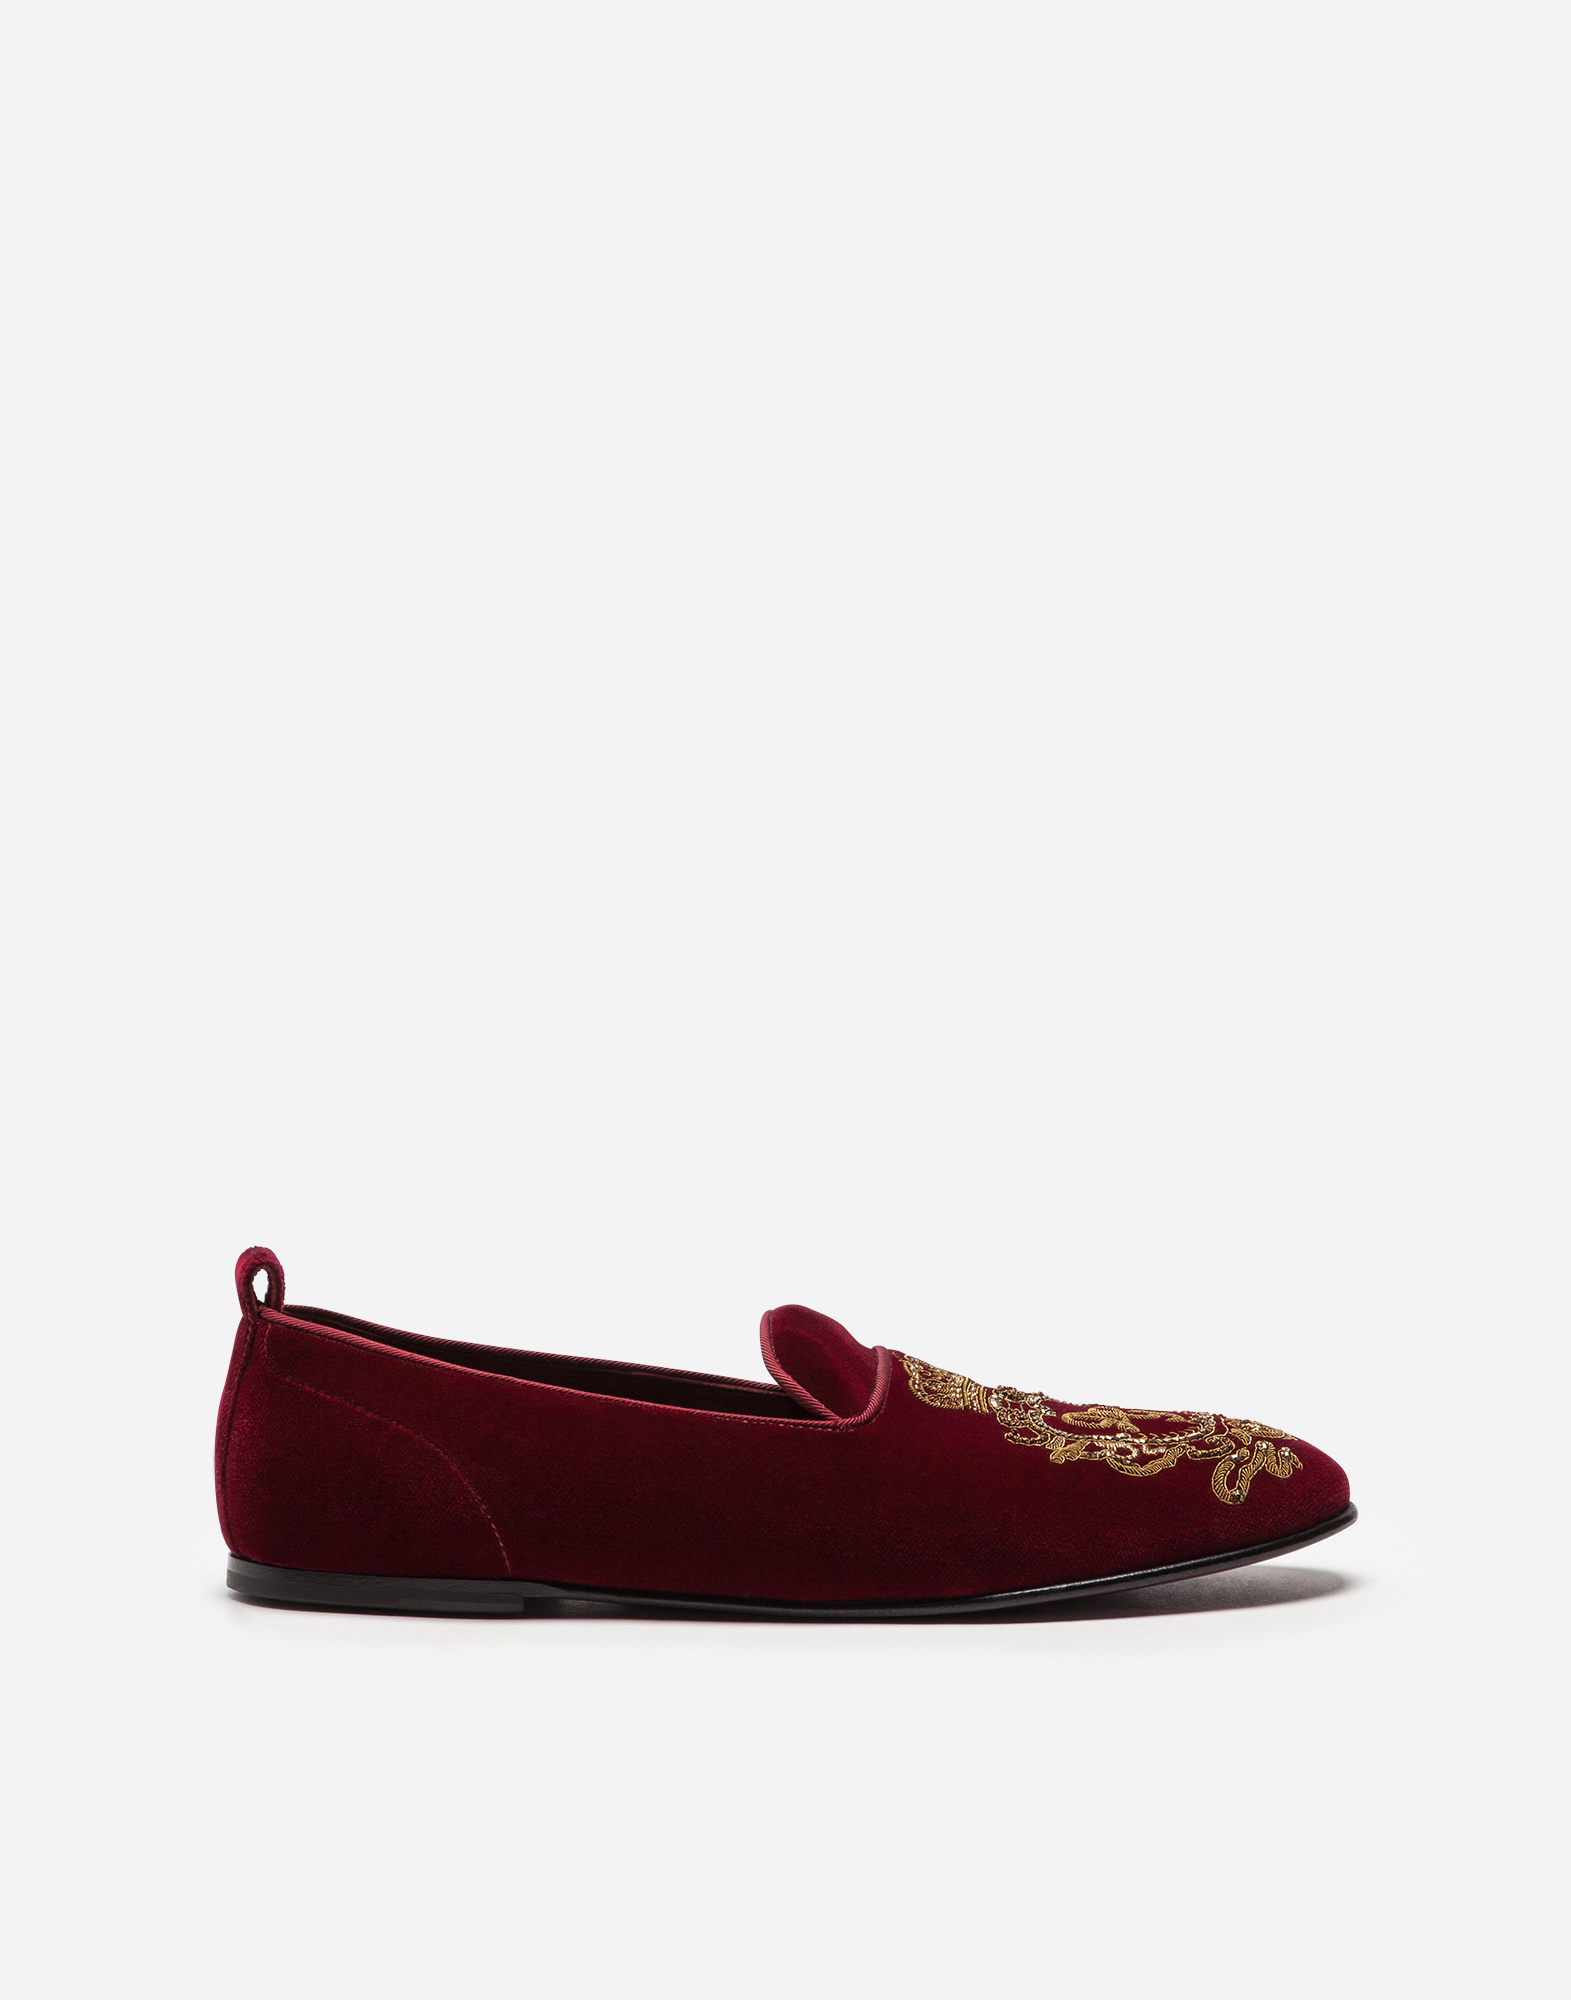 DOLCE & GABBANA VELVET SLIPPERS WITH COAT OF ARMS EMBROIDERY,A50194AU4428B420